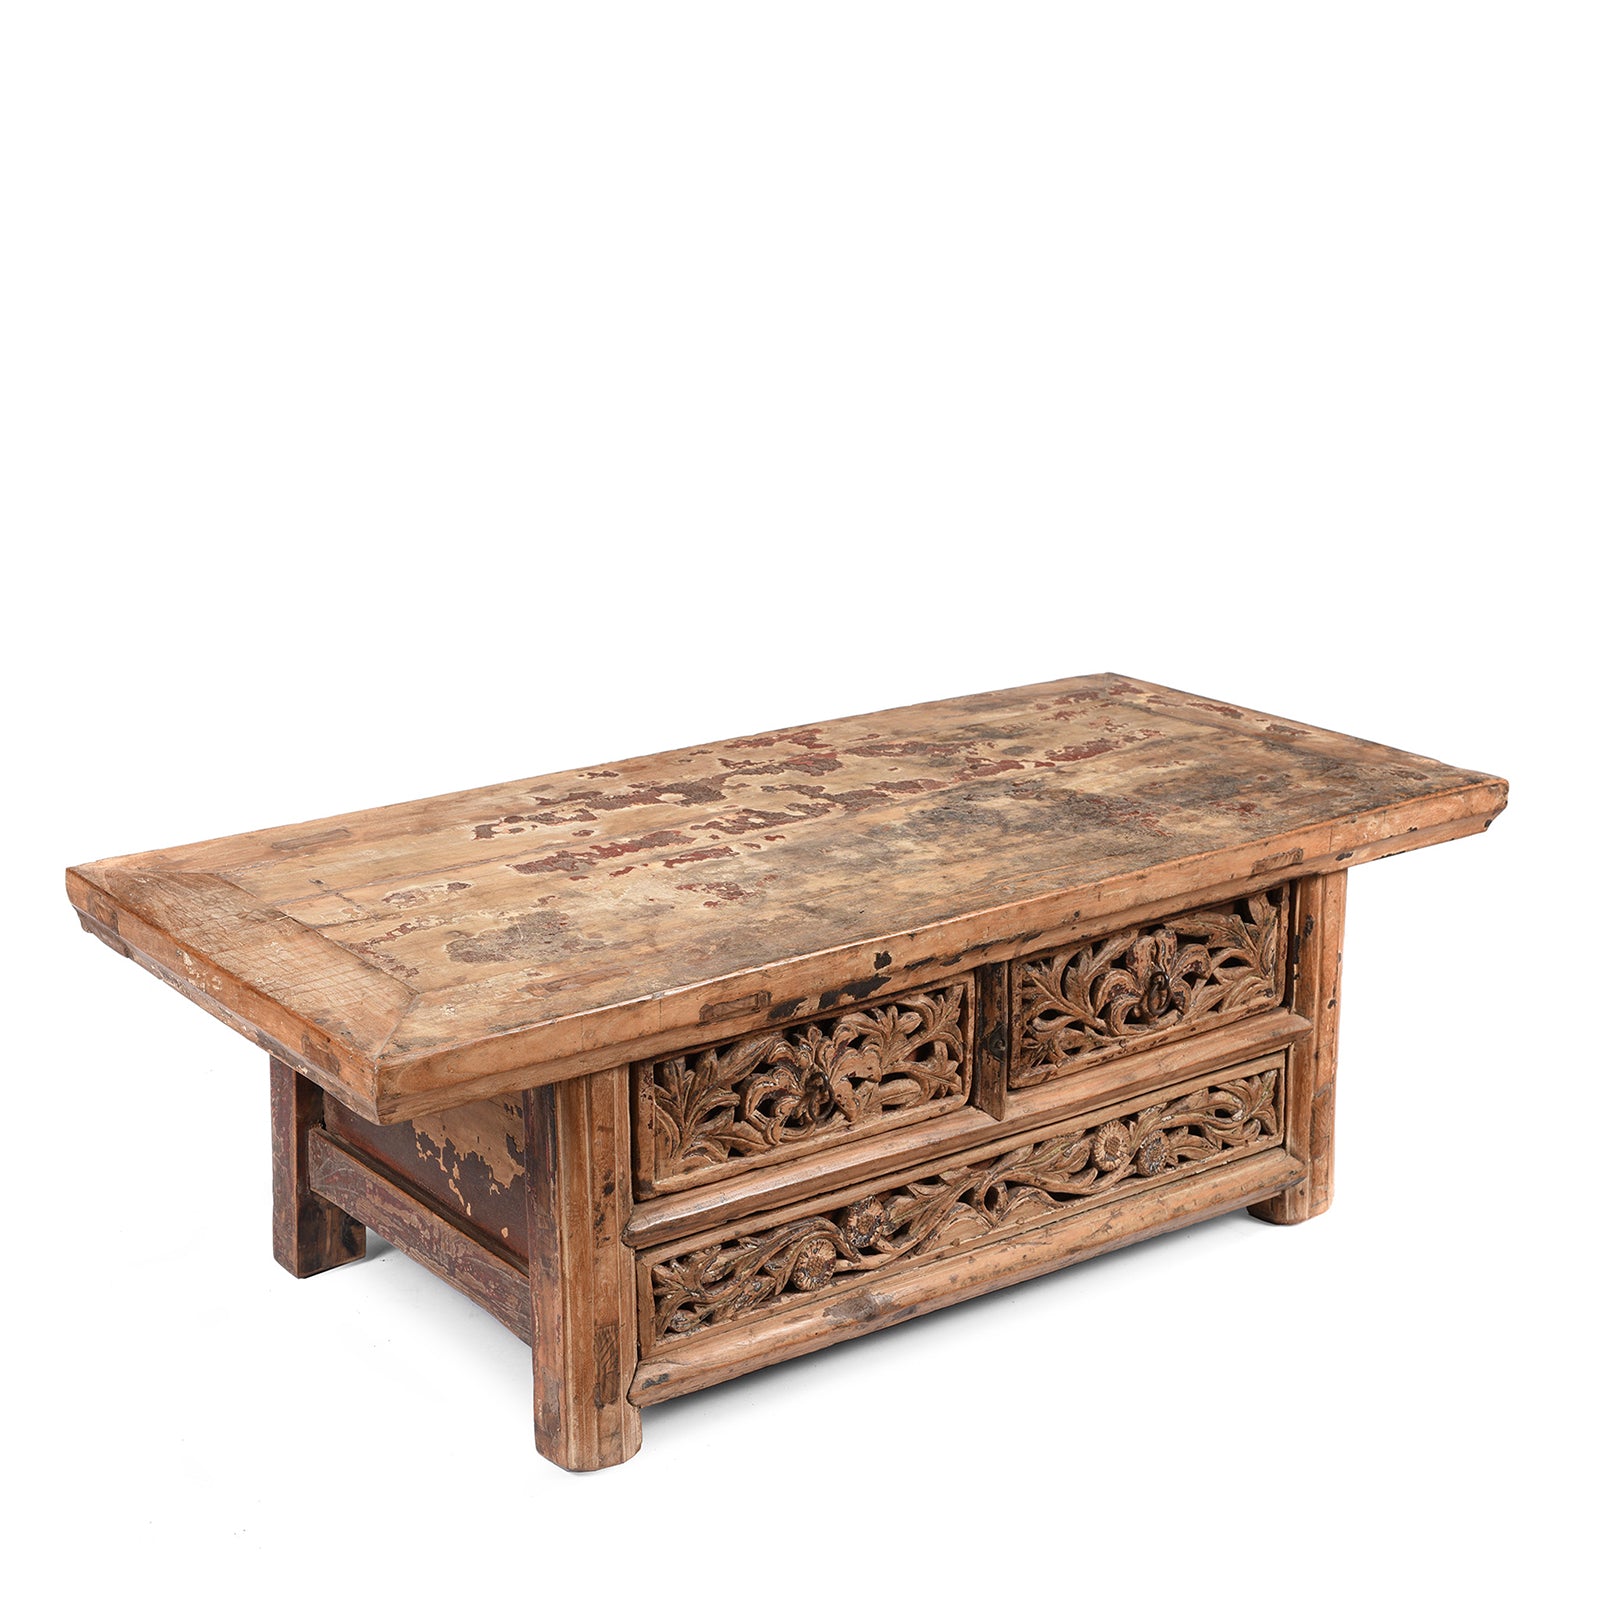 Bleached Elm Kang Table From Shanxi  - 19th Century | Indigo Antiques